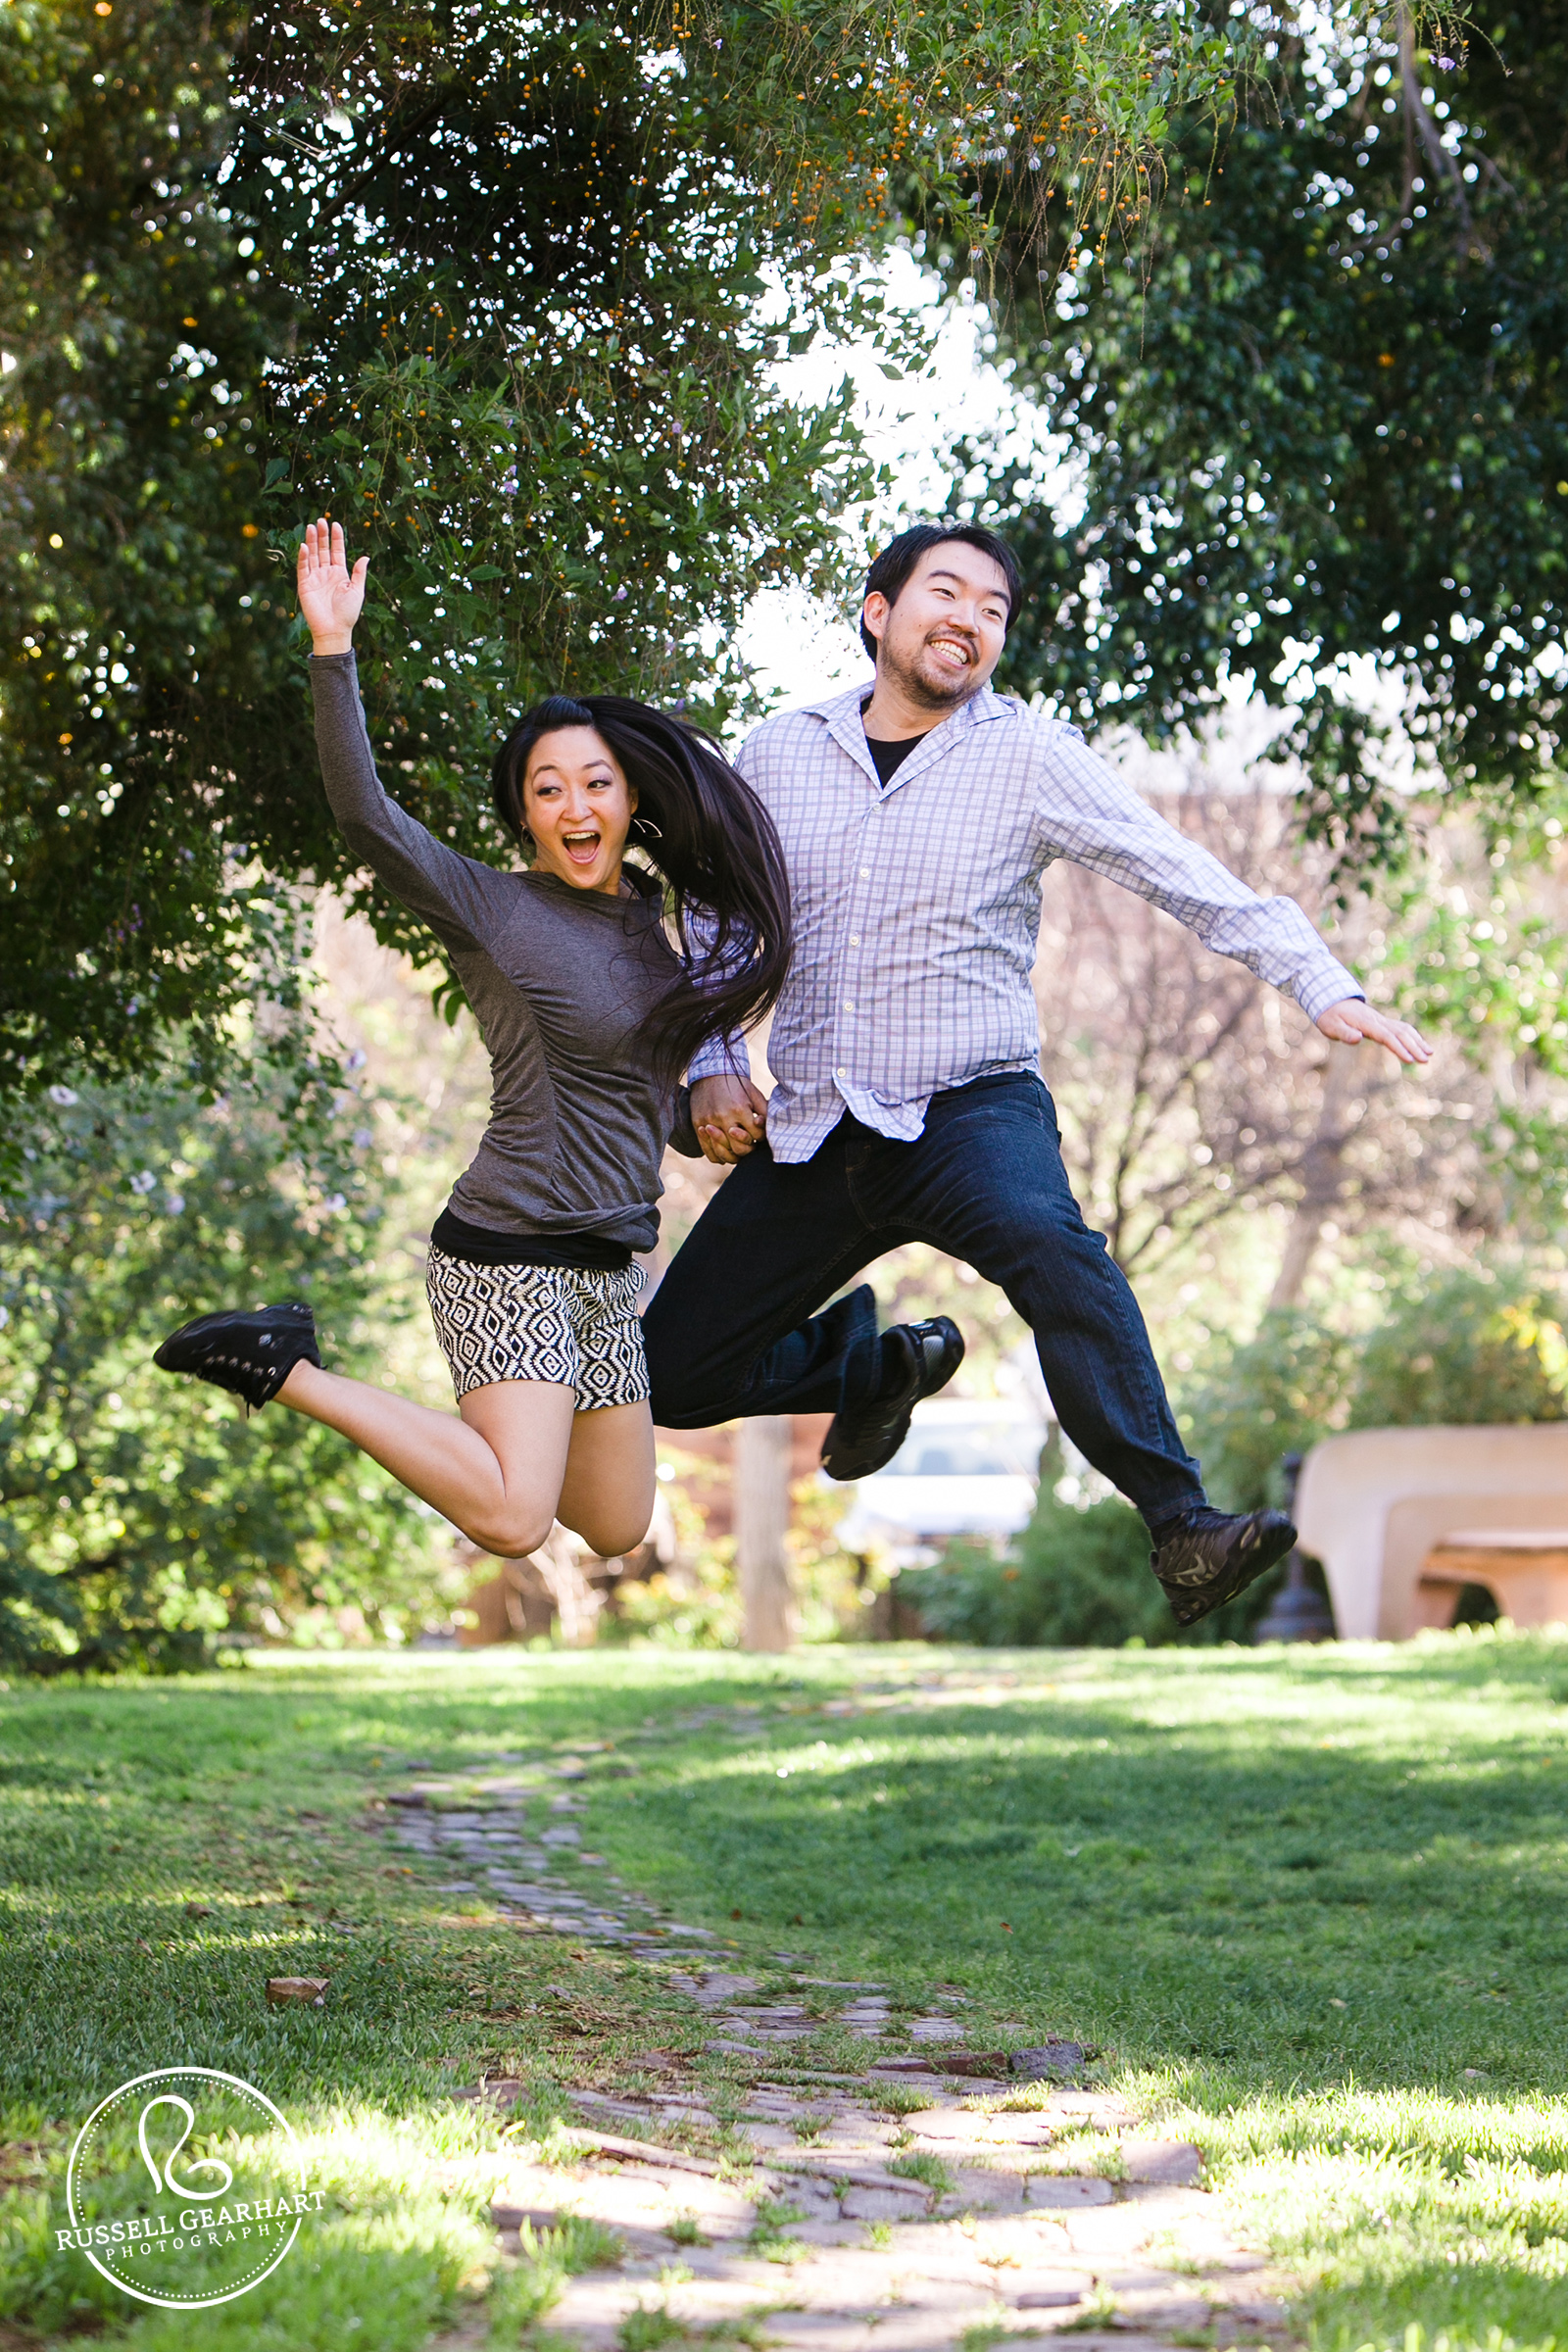 Pasadena Outdoor Park Engagement Portraits – Russell Gearhart Photography – www.gearhartphoto.com